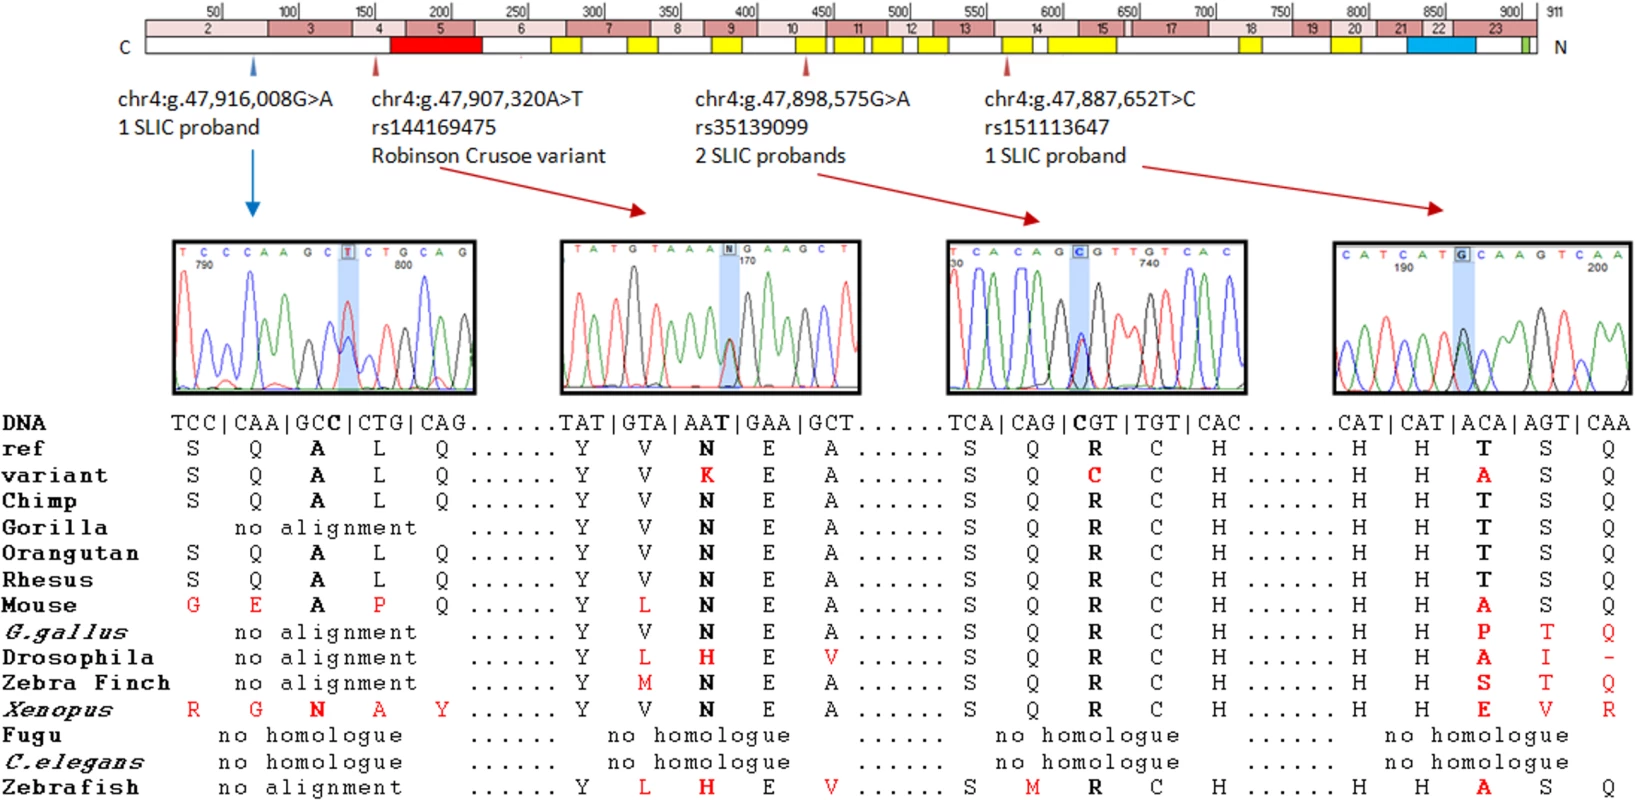 Putative contributory coding variants identified in &lt;i&gt;NFXL1&lt;/i&gt; by this study.